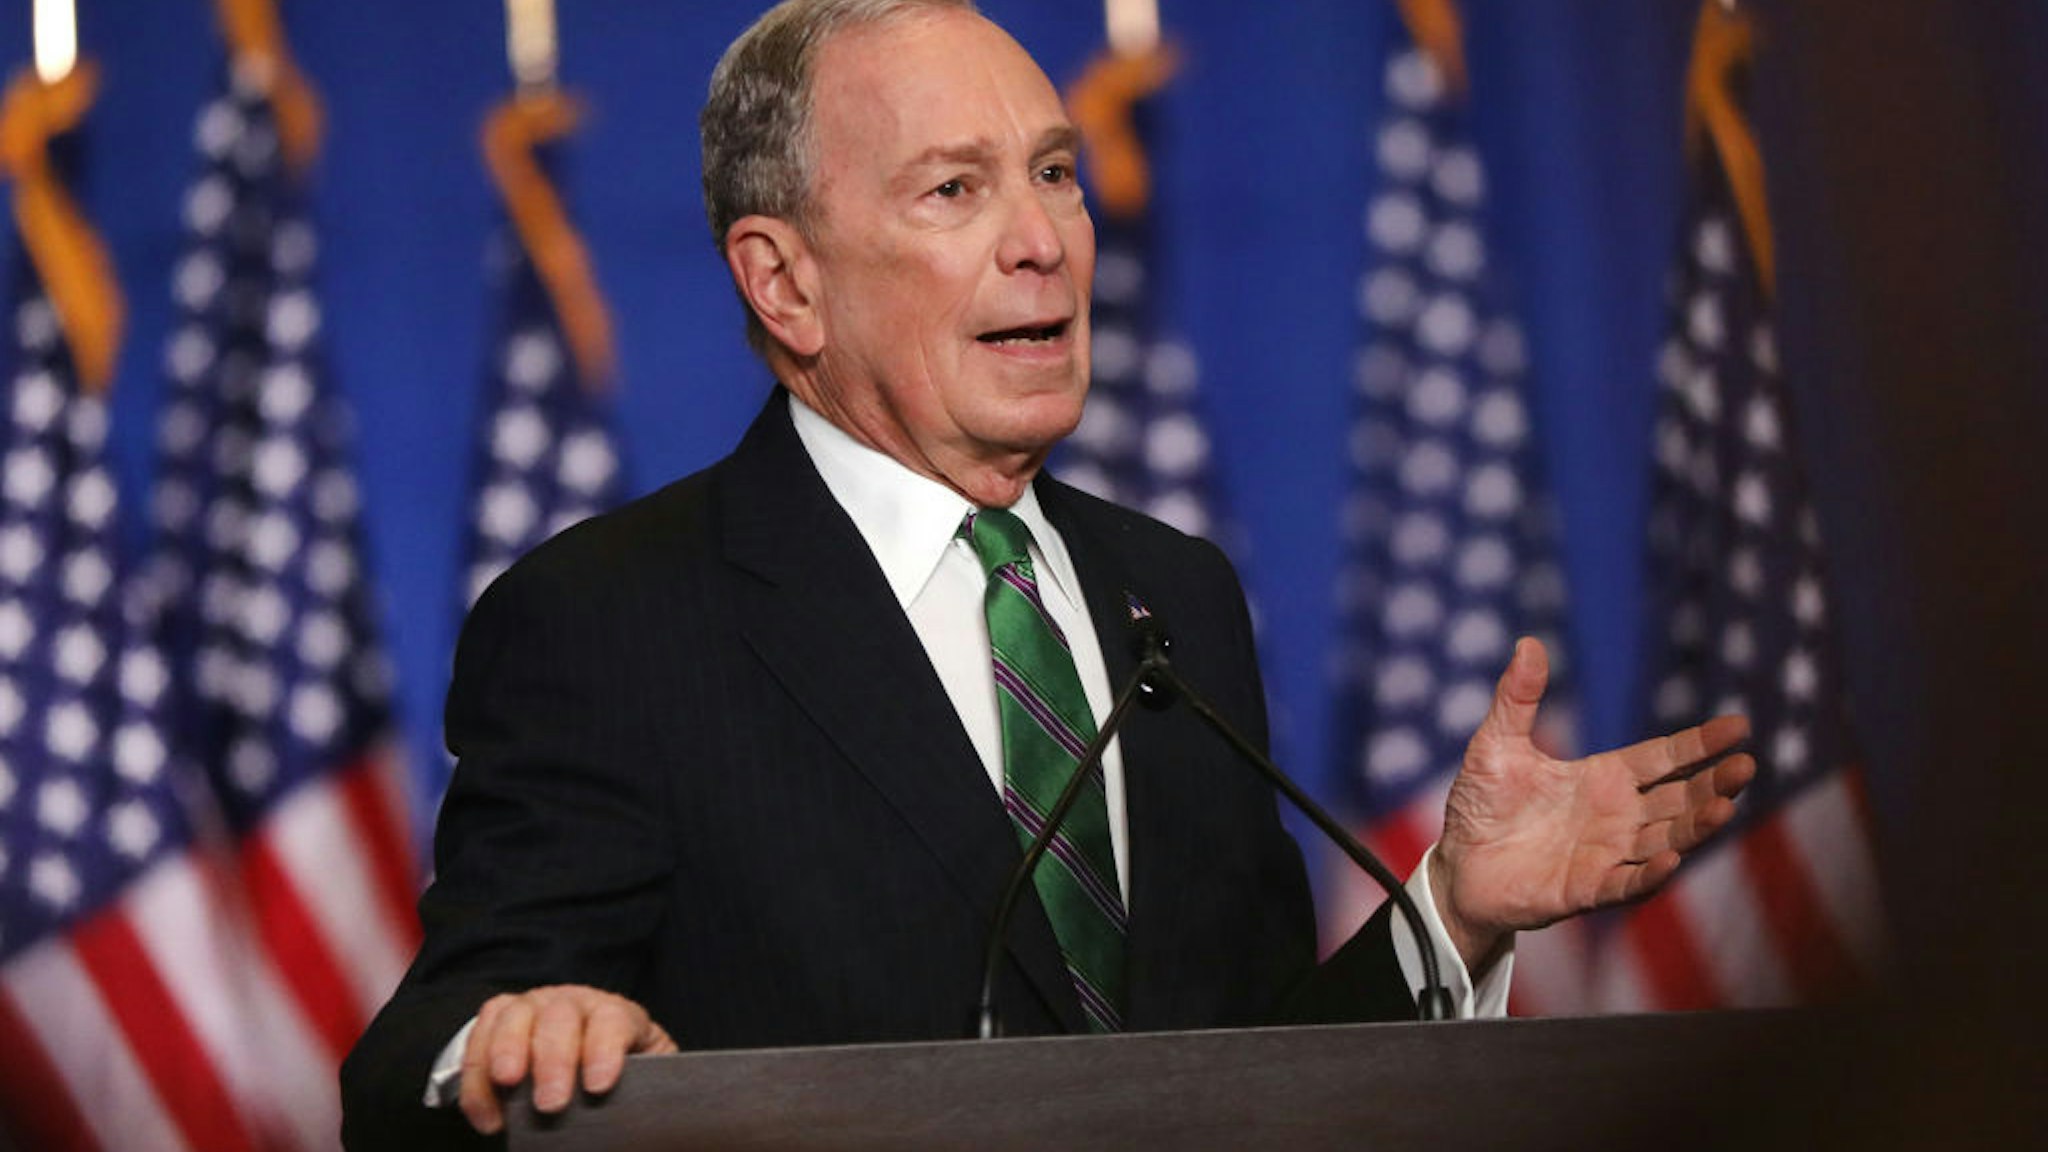 Former Democratic presidential candidate Mike Bloomberg addresses his staff and the media after announcing that he will be ending his campaign on March 04, 2020 in New York City.